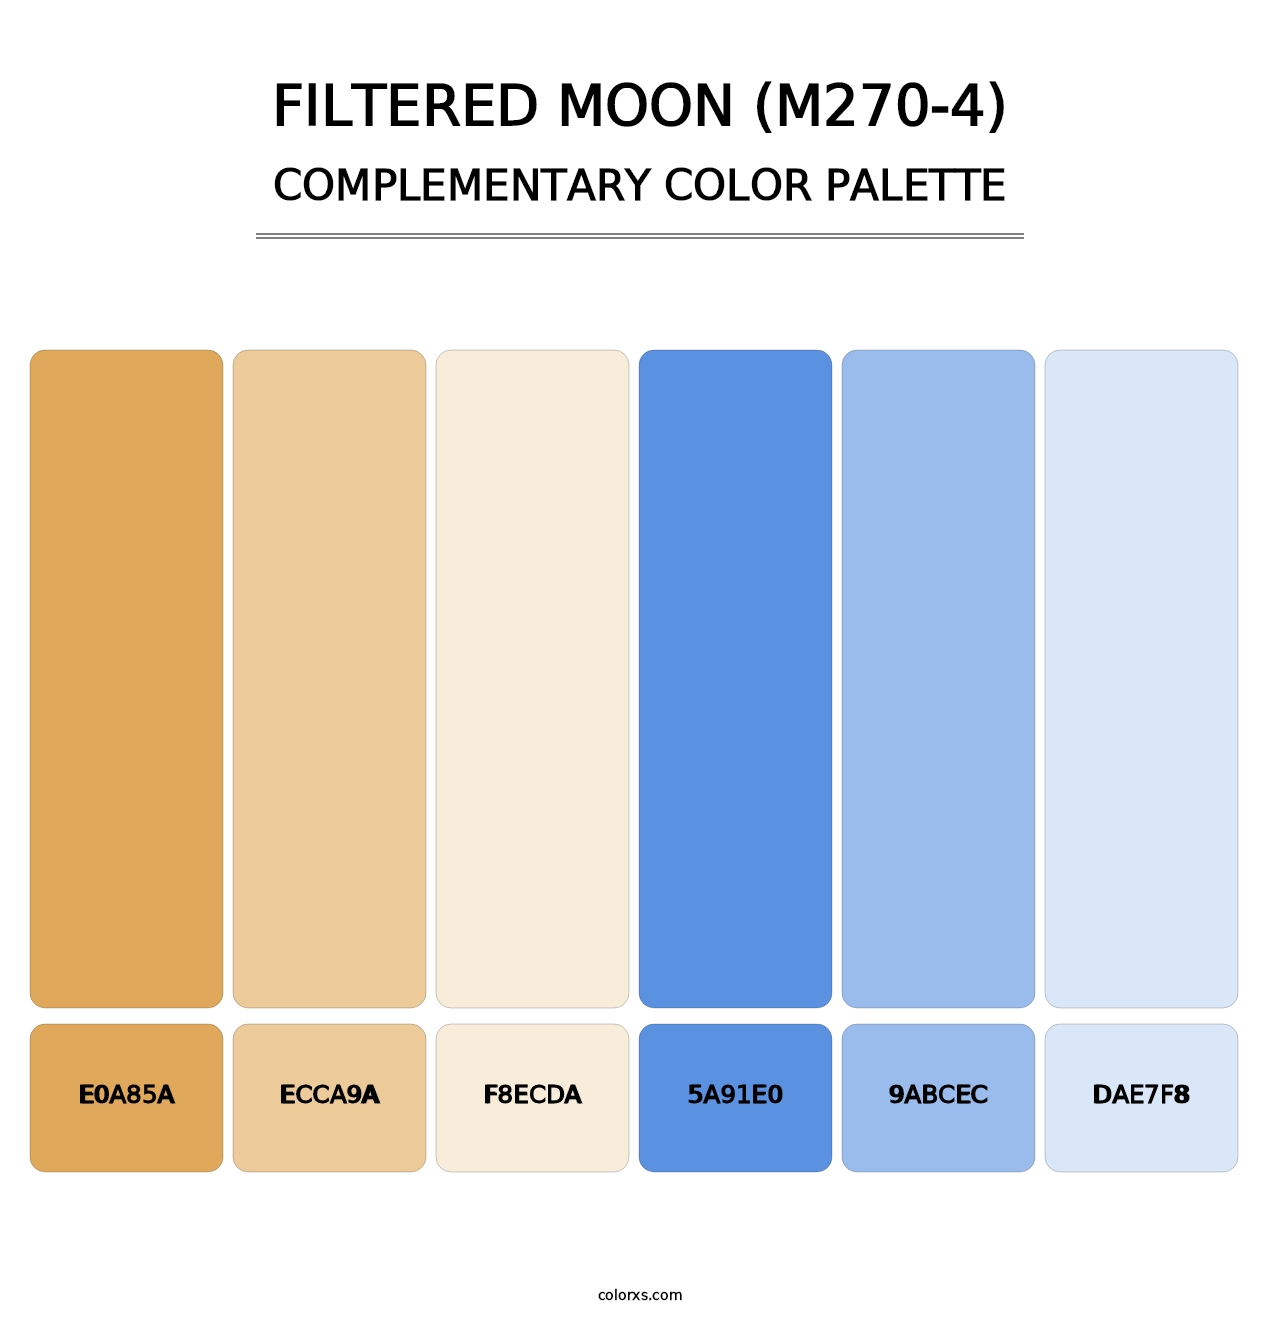 Filtered Moon (M270-4) - Complementary Color Palette